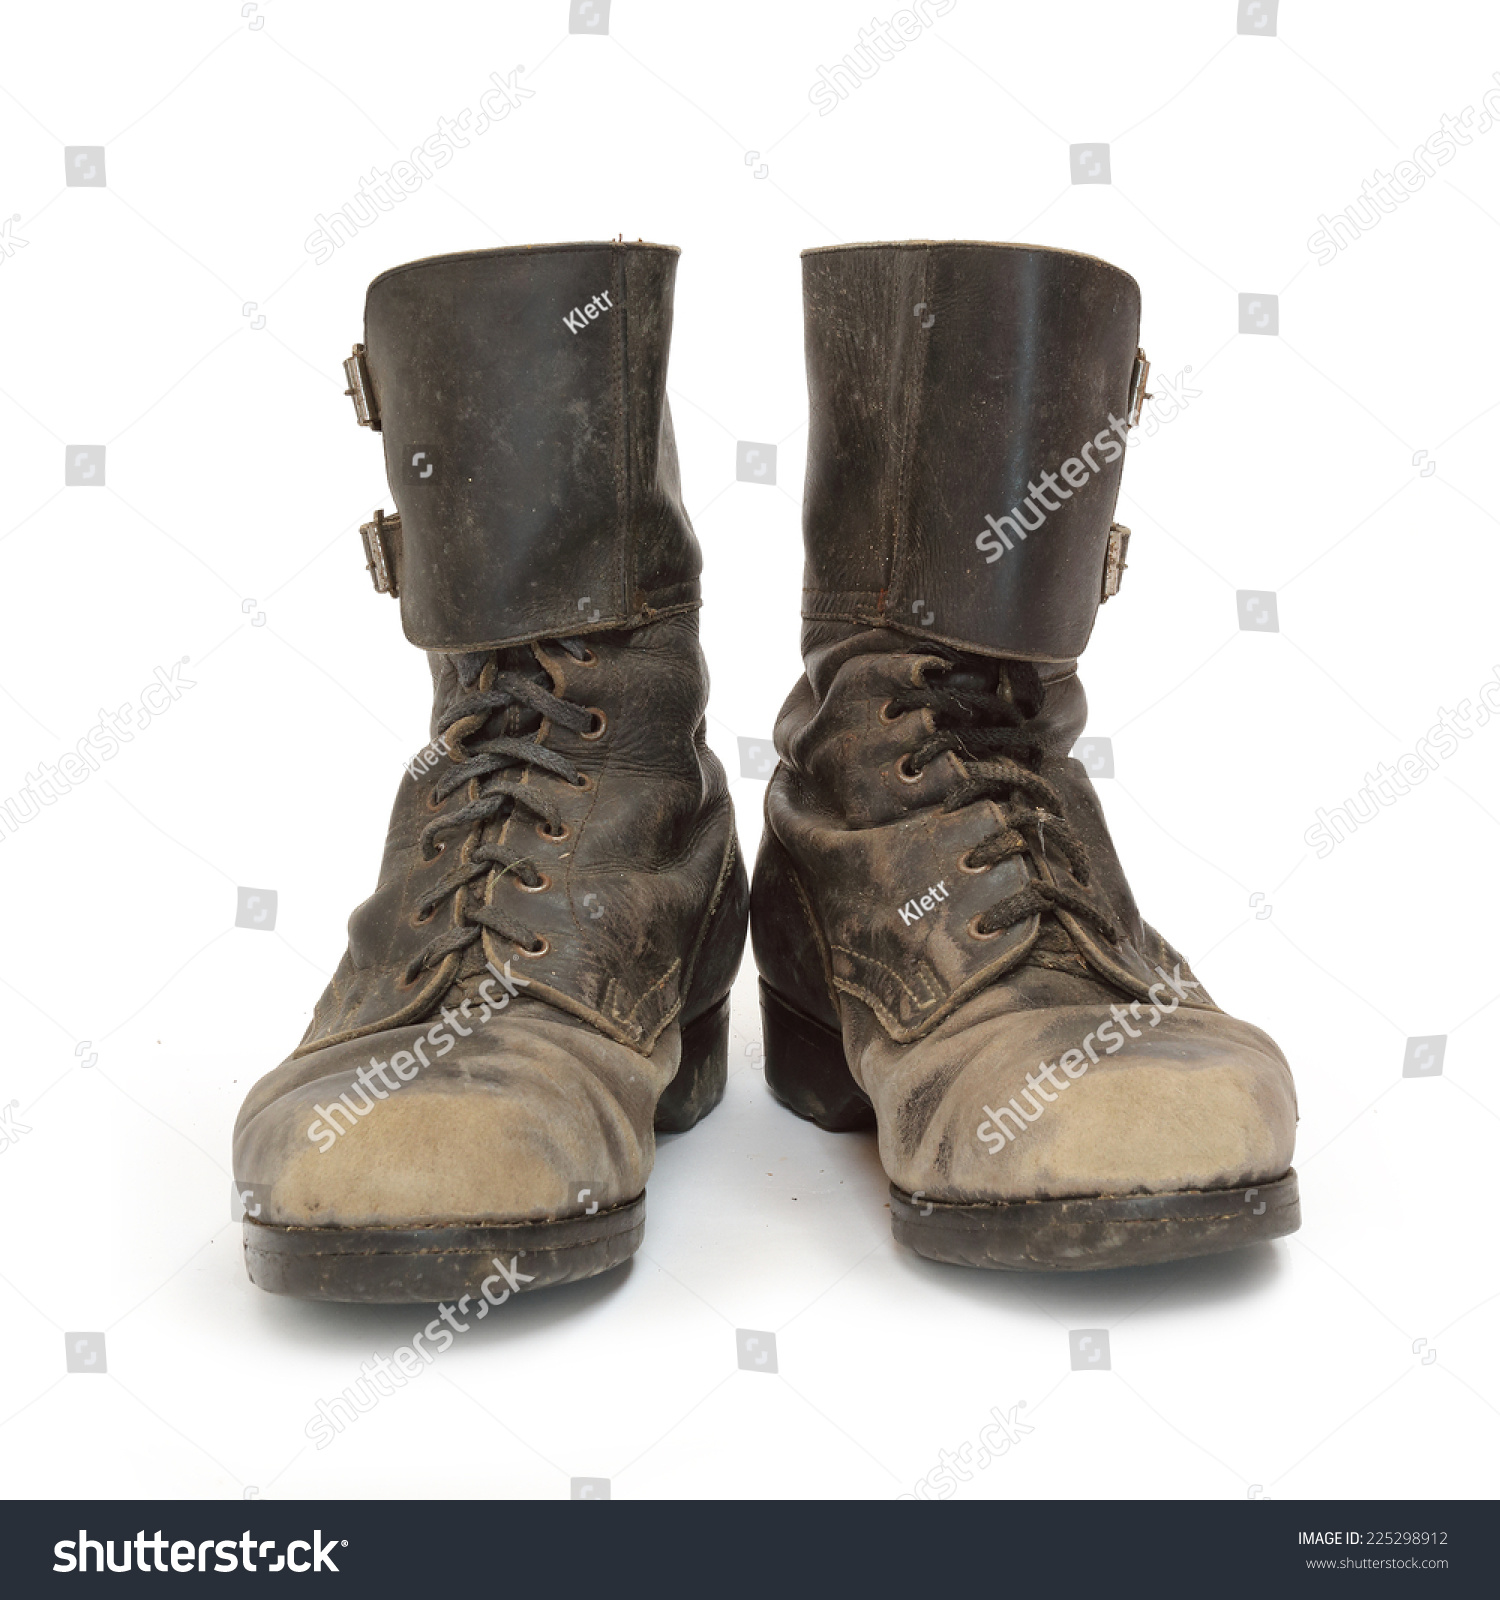 Old Army Combat Boots On White Stock Photo 225298912 - Shutterstock